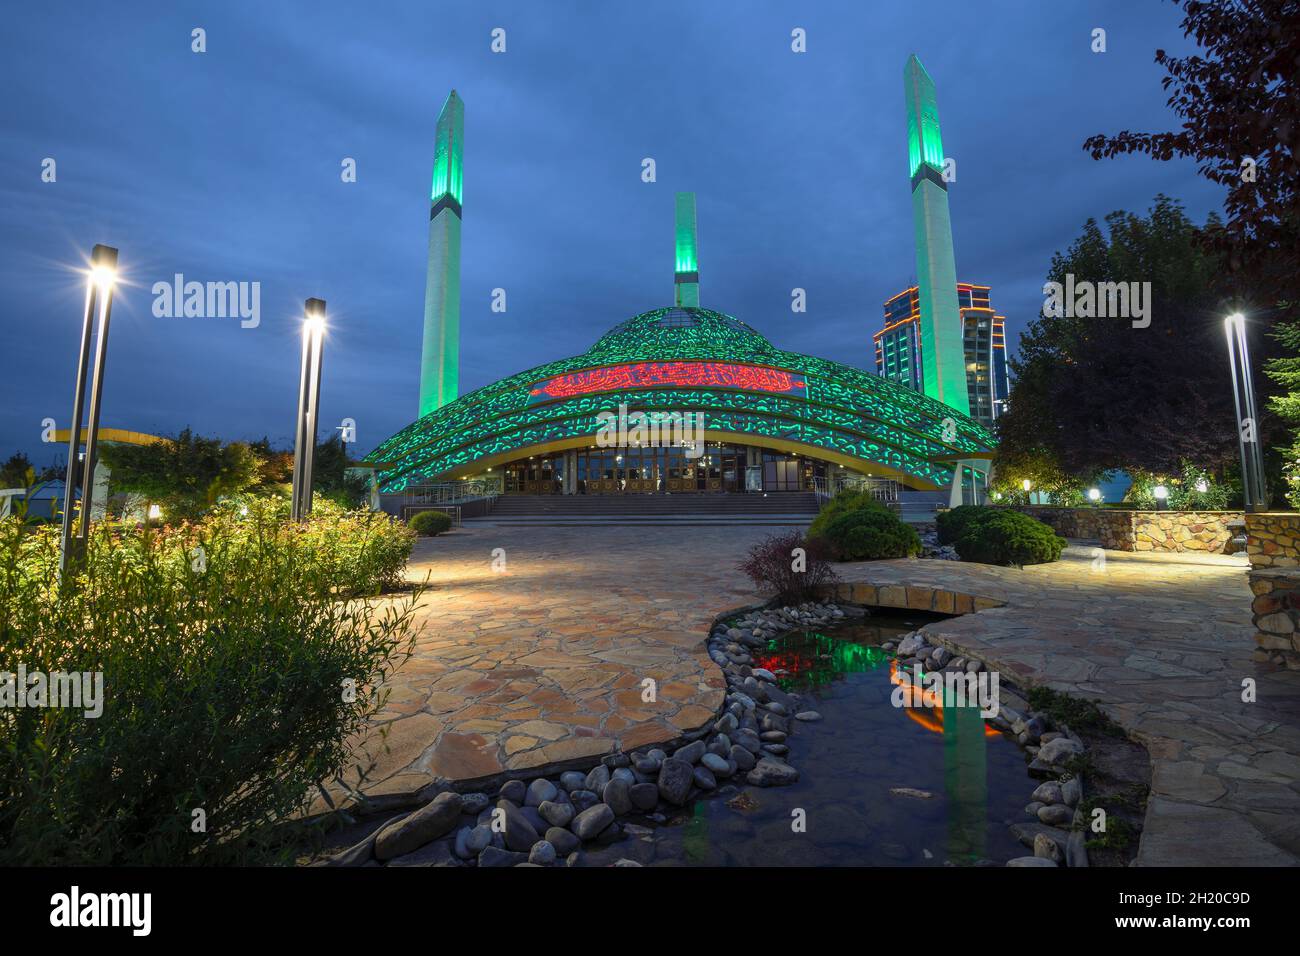 ARGUN, RUSSIA - SEPTEMBER 28, 2021: View of the 'Mother's Heart' Mosque in the night illumination on a cloudy September evening Stock Photo